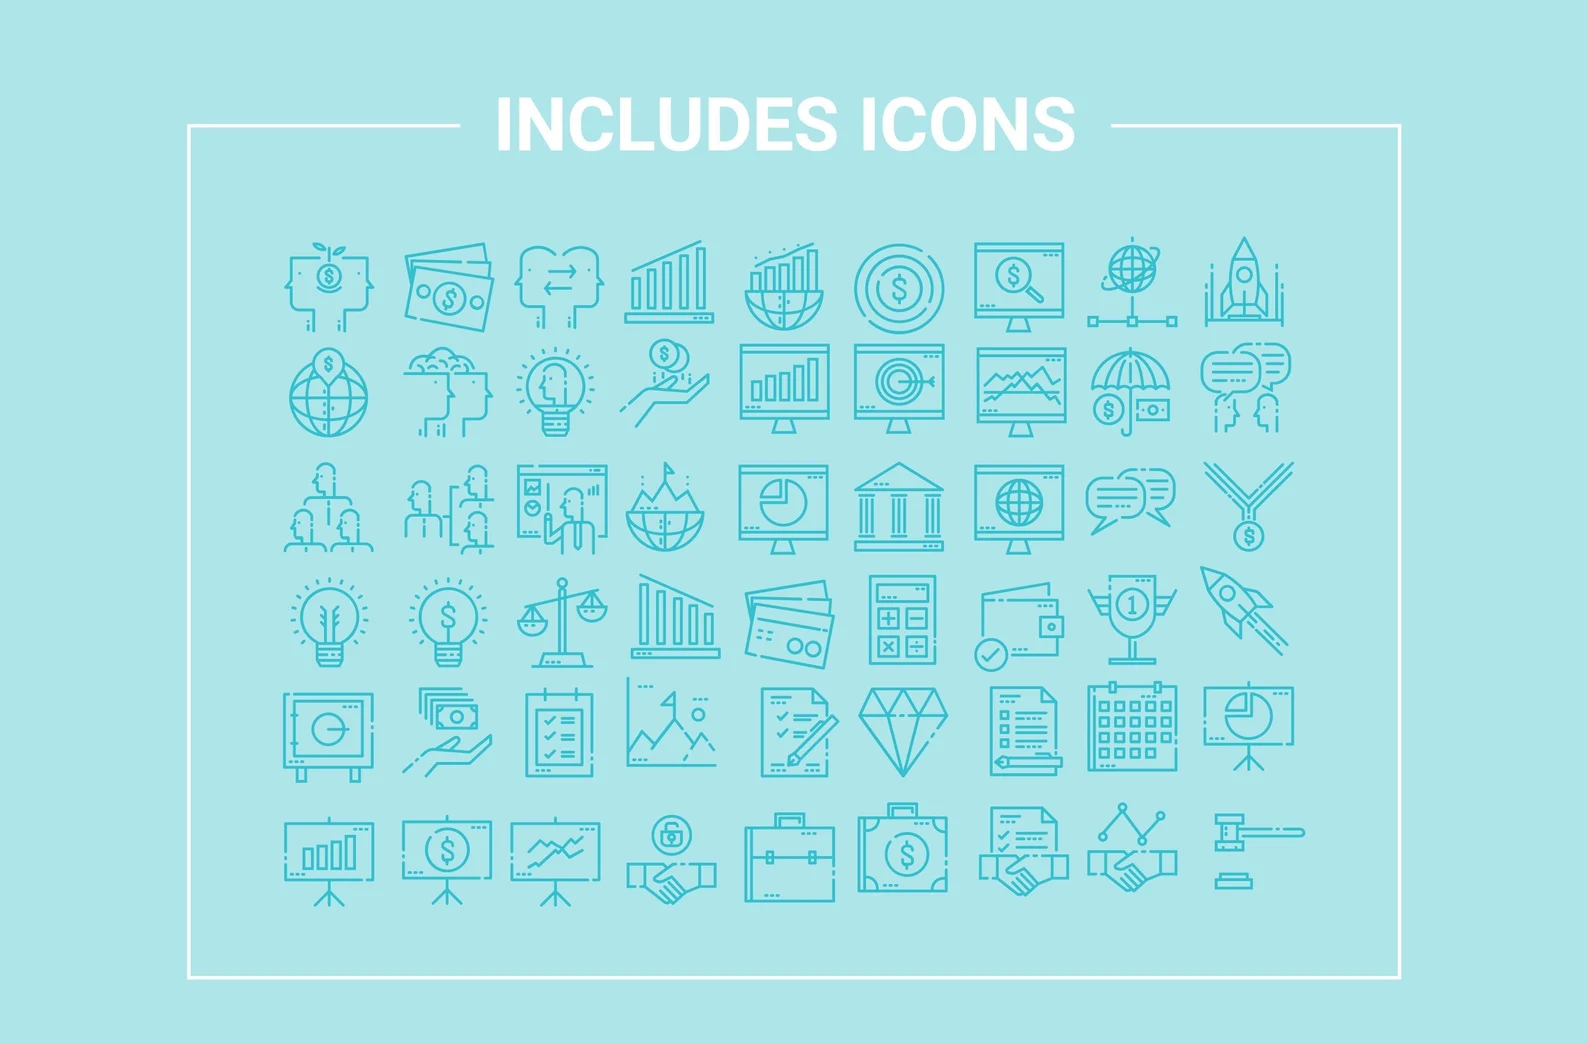 This collection includes own turquoise icons.